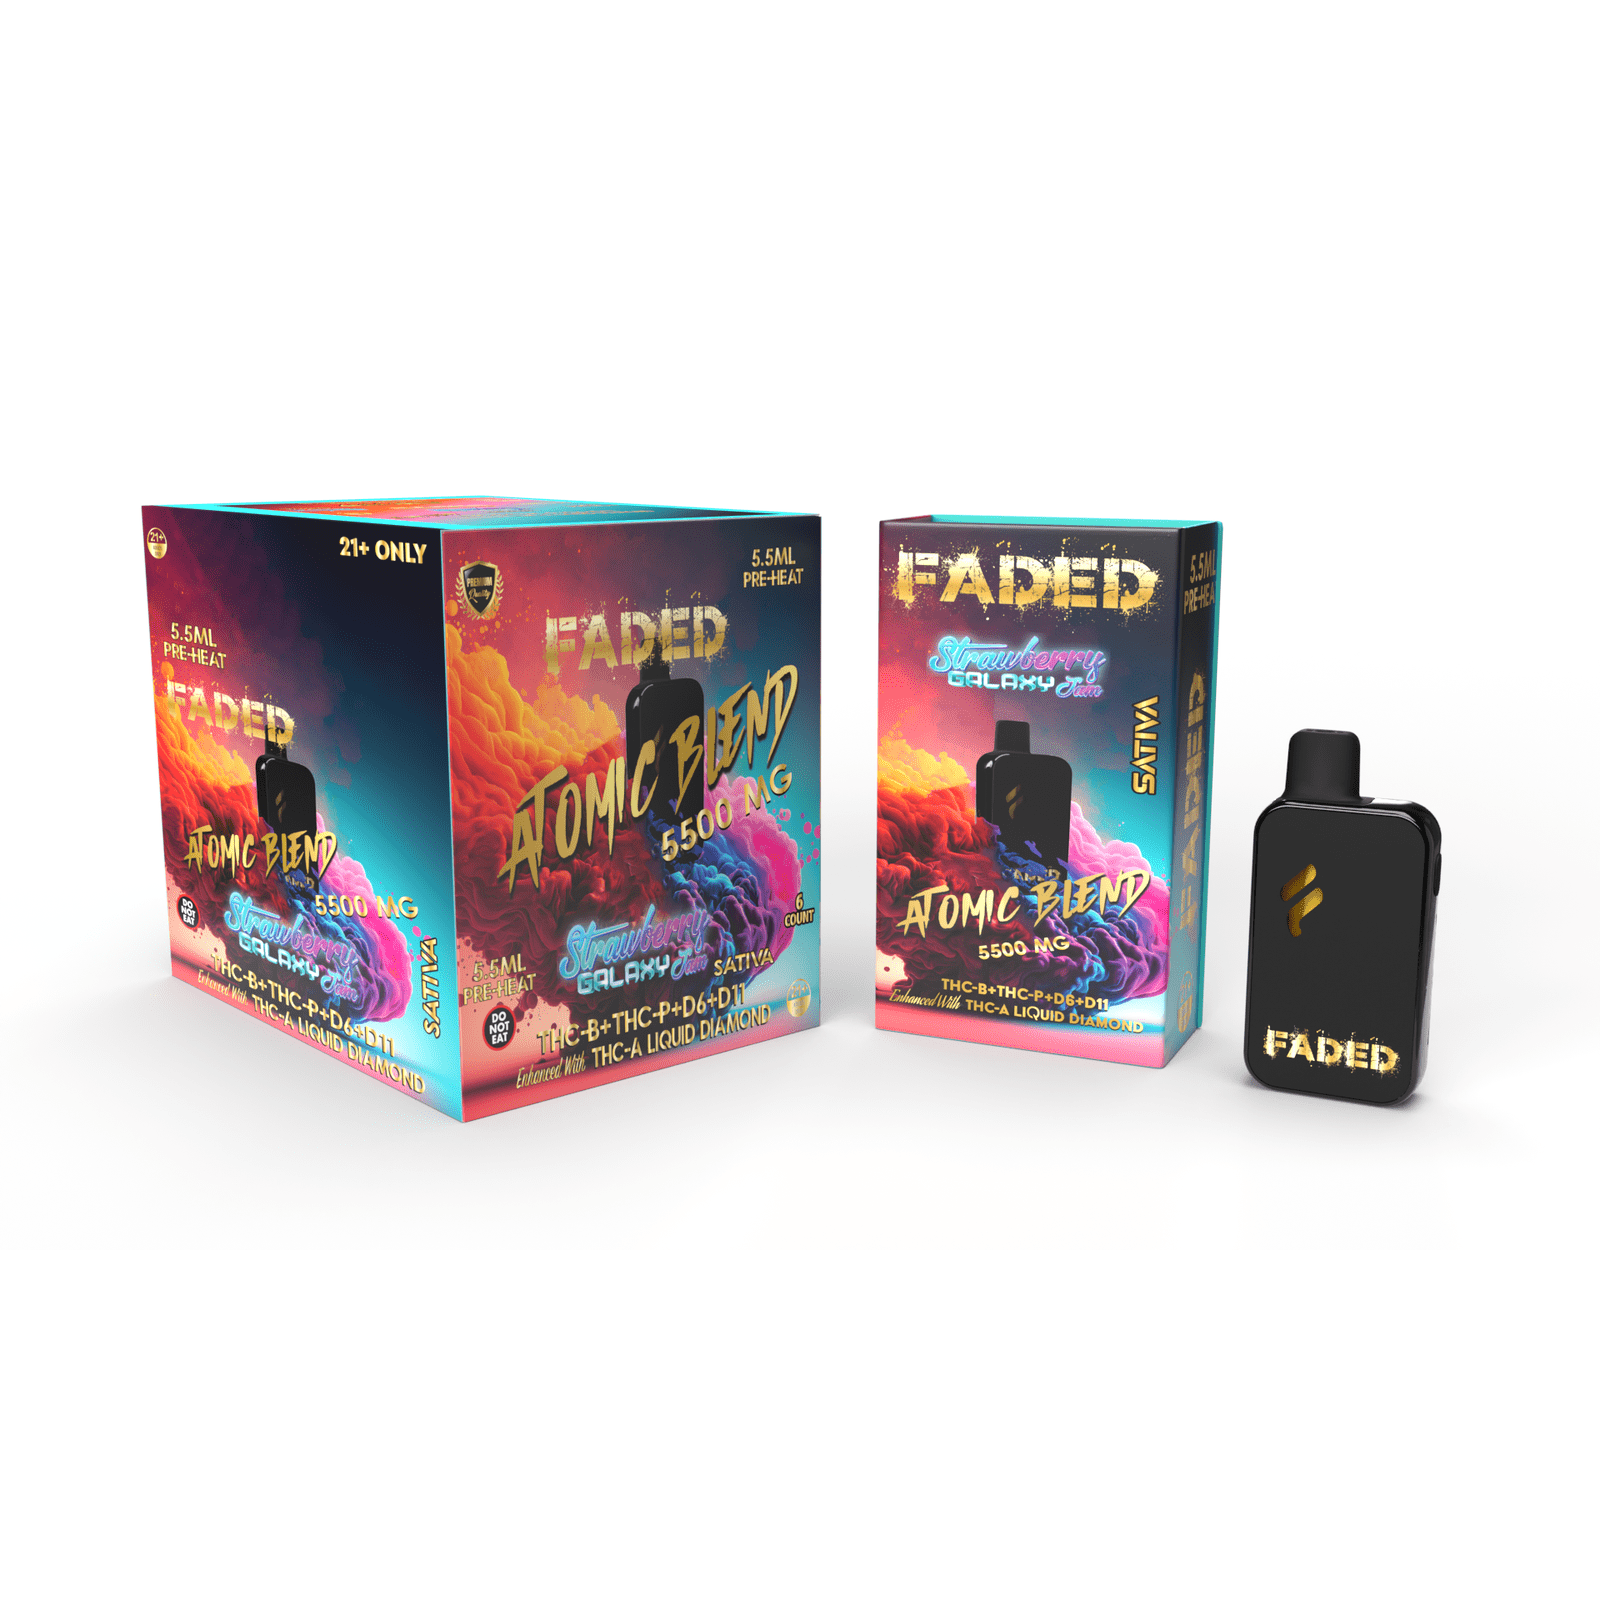 FADED THC-B+THC-P+D6+D11 ENHANCED WITH THC-A LIQUID DIAMOND RECHARGEABLE DISPOSABLE - SATIVA STRAWBERRY GALAXY JAM 5.5ML